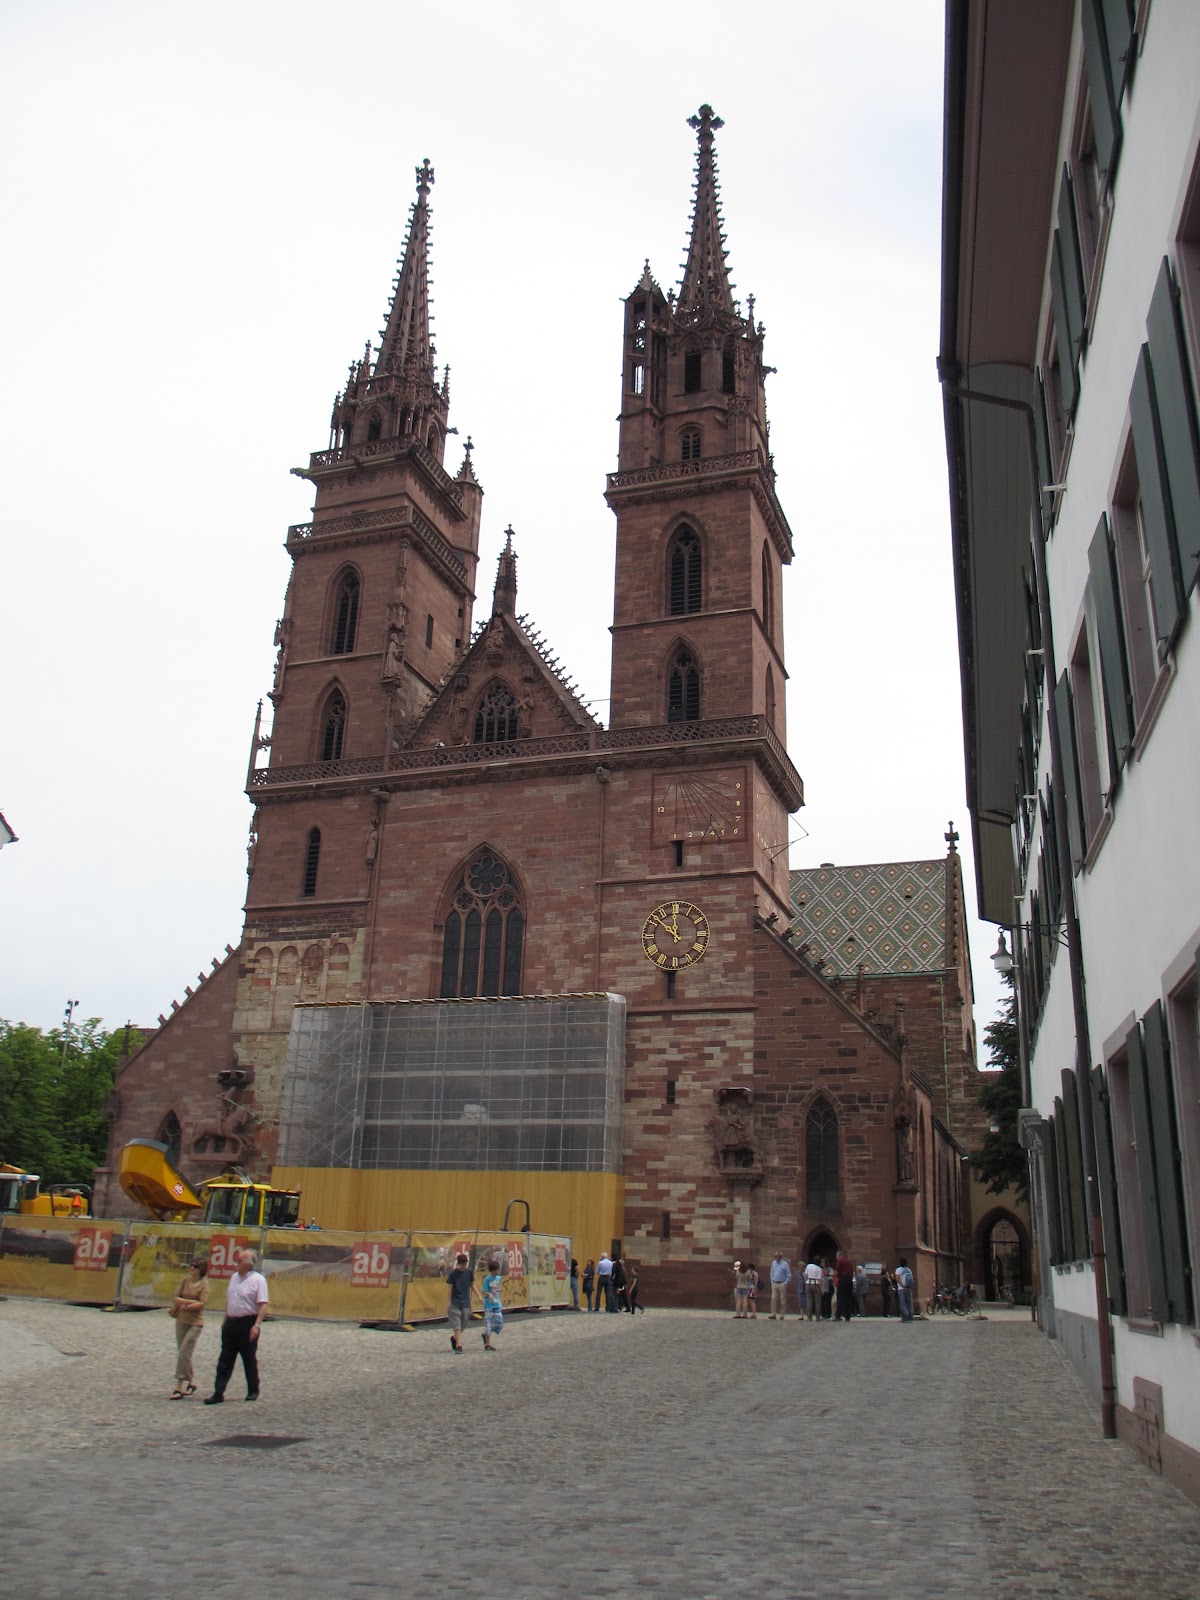 Cannundrums: Basel Munster (or Cathedral)